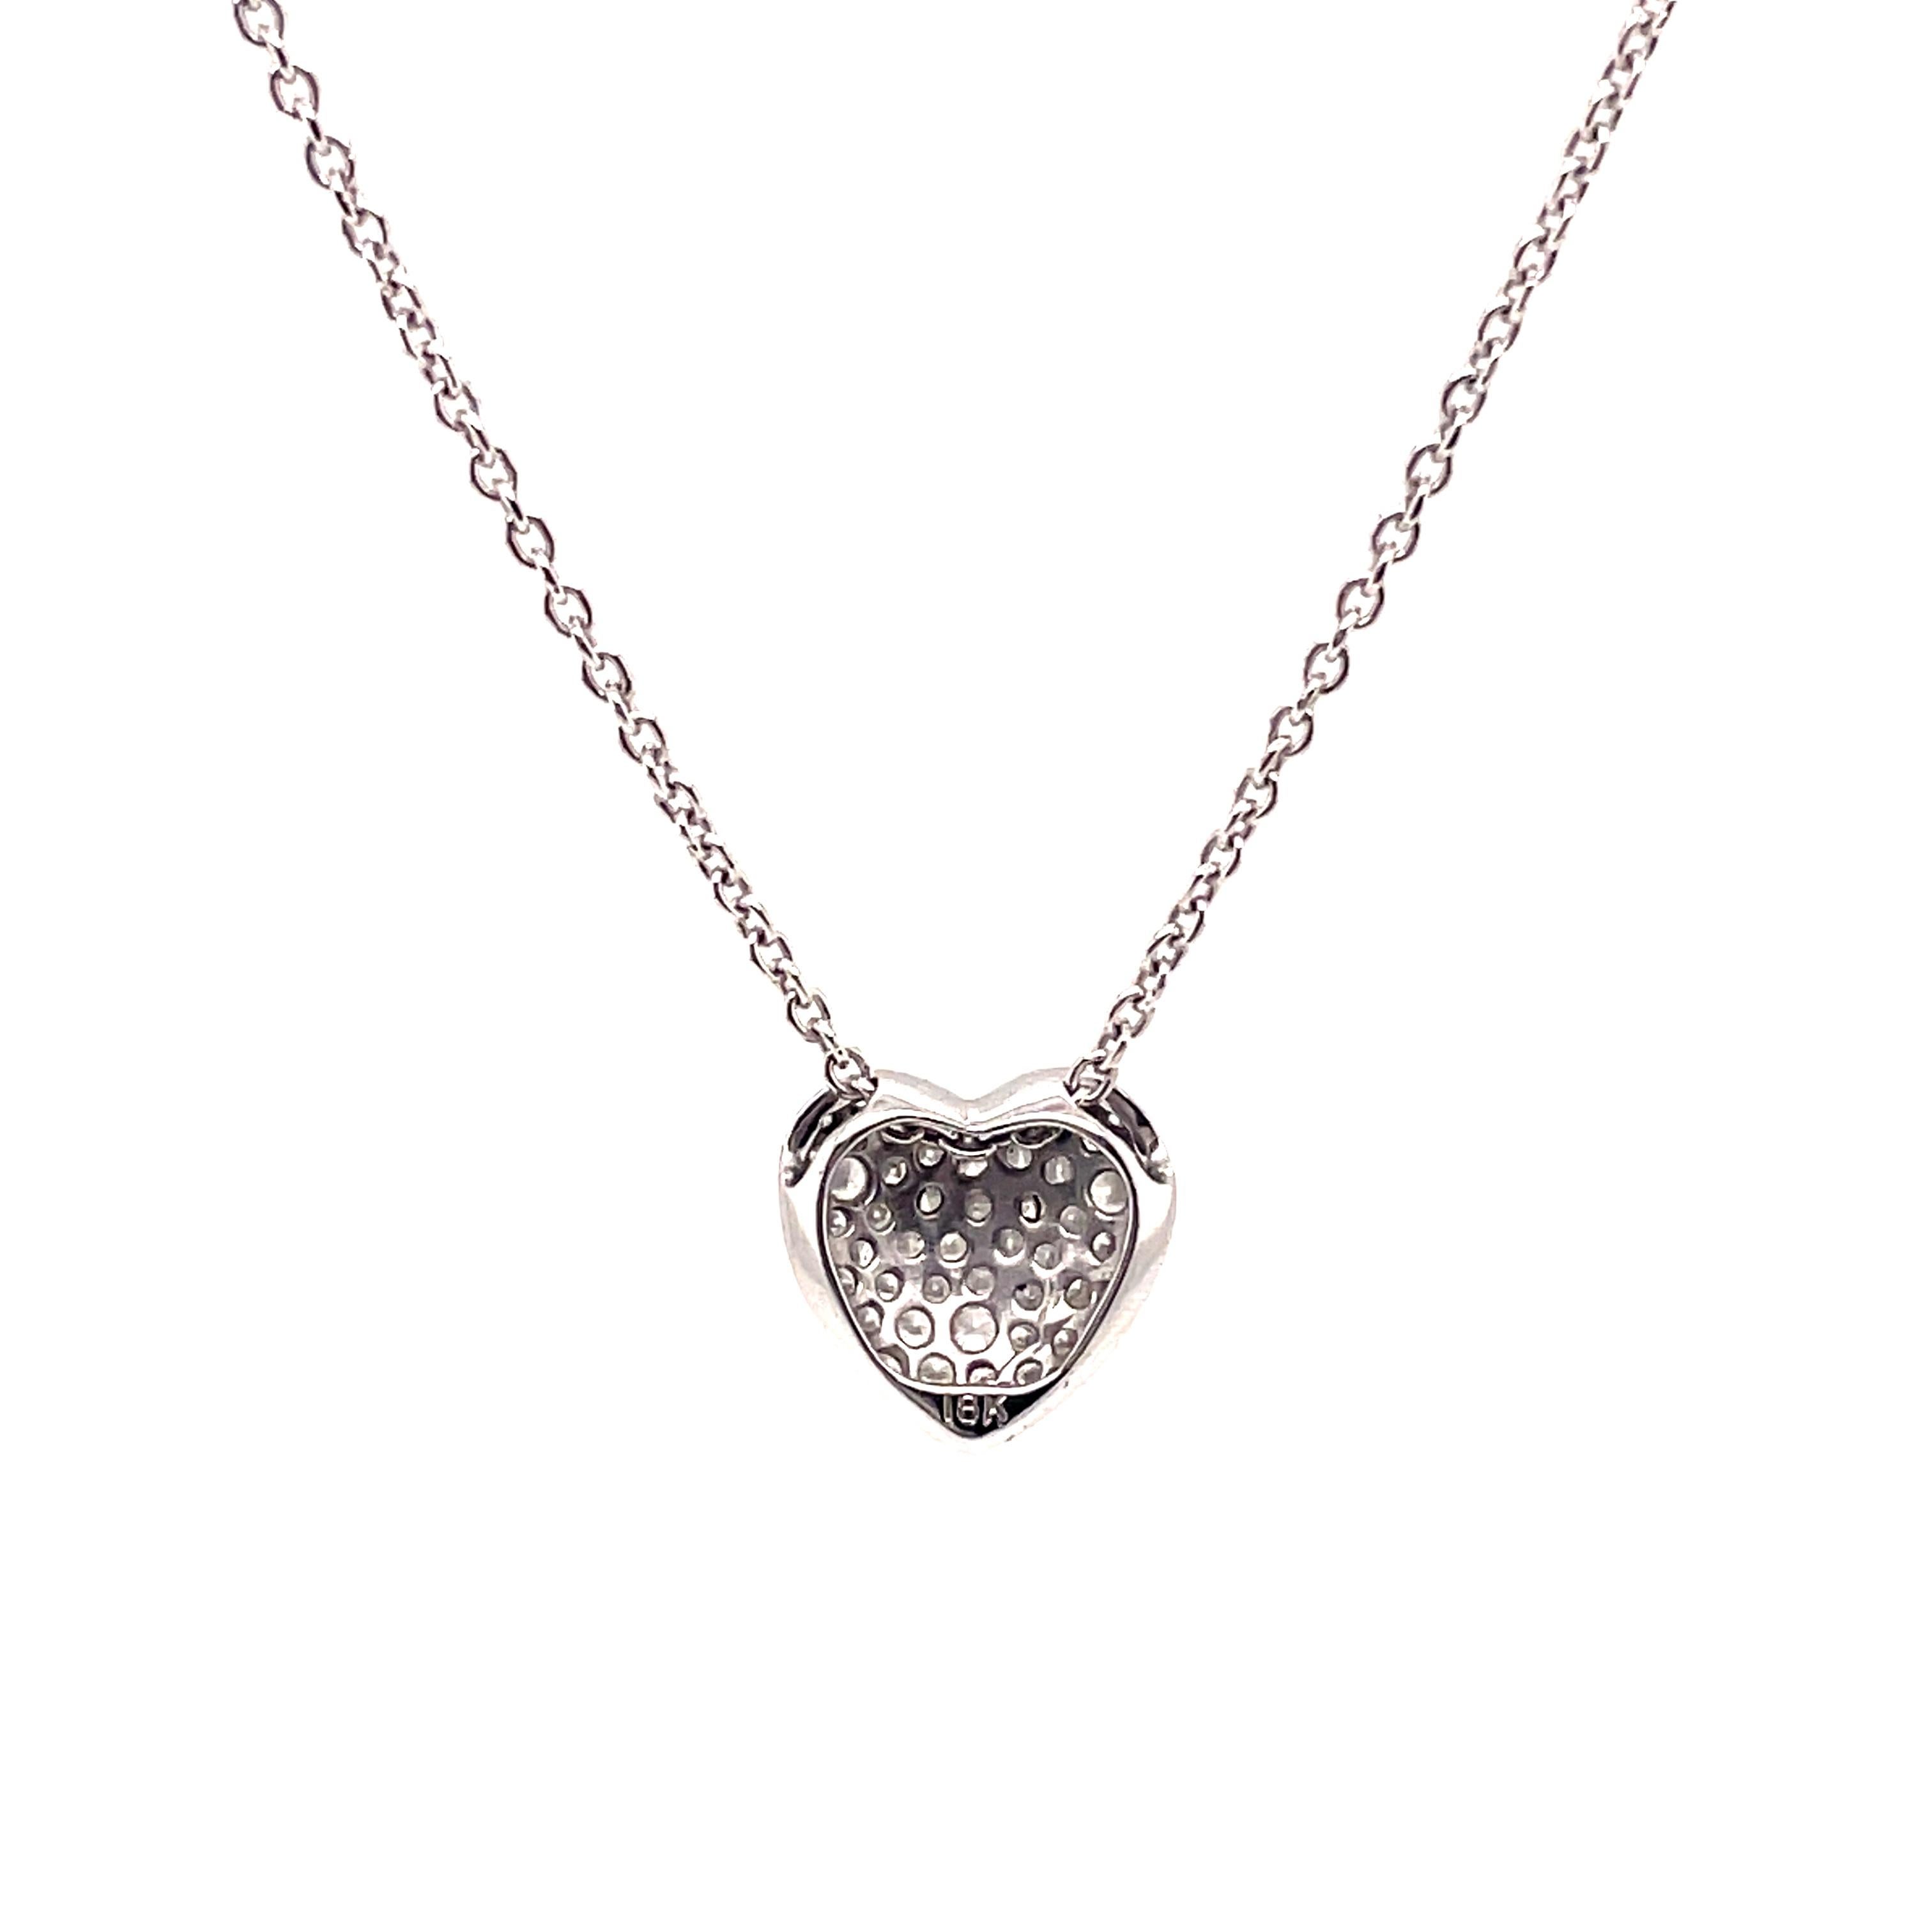 Pave Set Diamond Heart Pendant Necklace 18k White Gold In New Condition For Sale In BEVERLY HILLS, CA